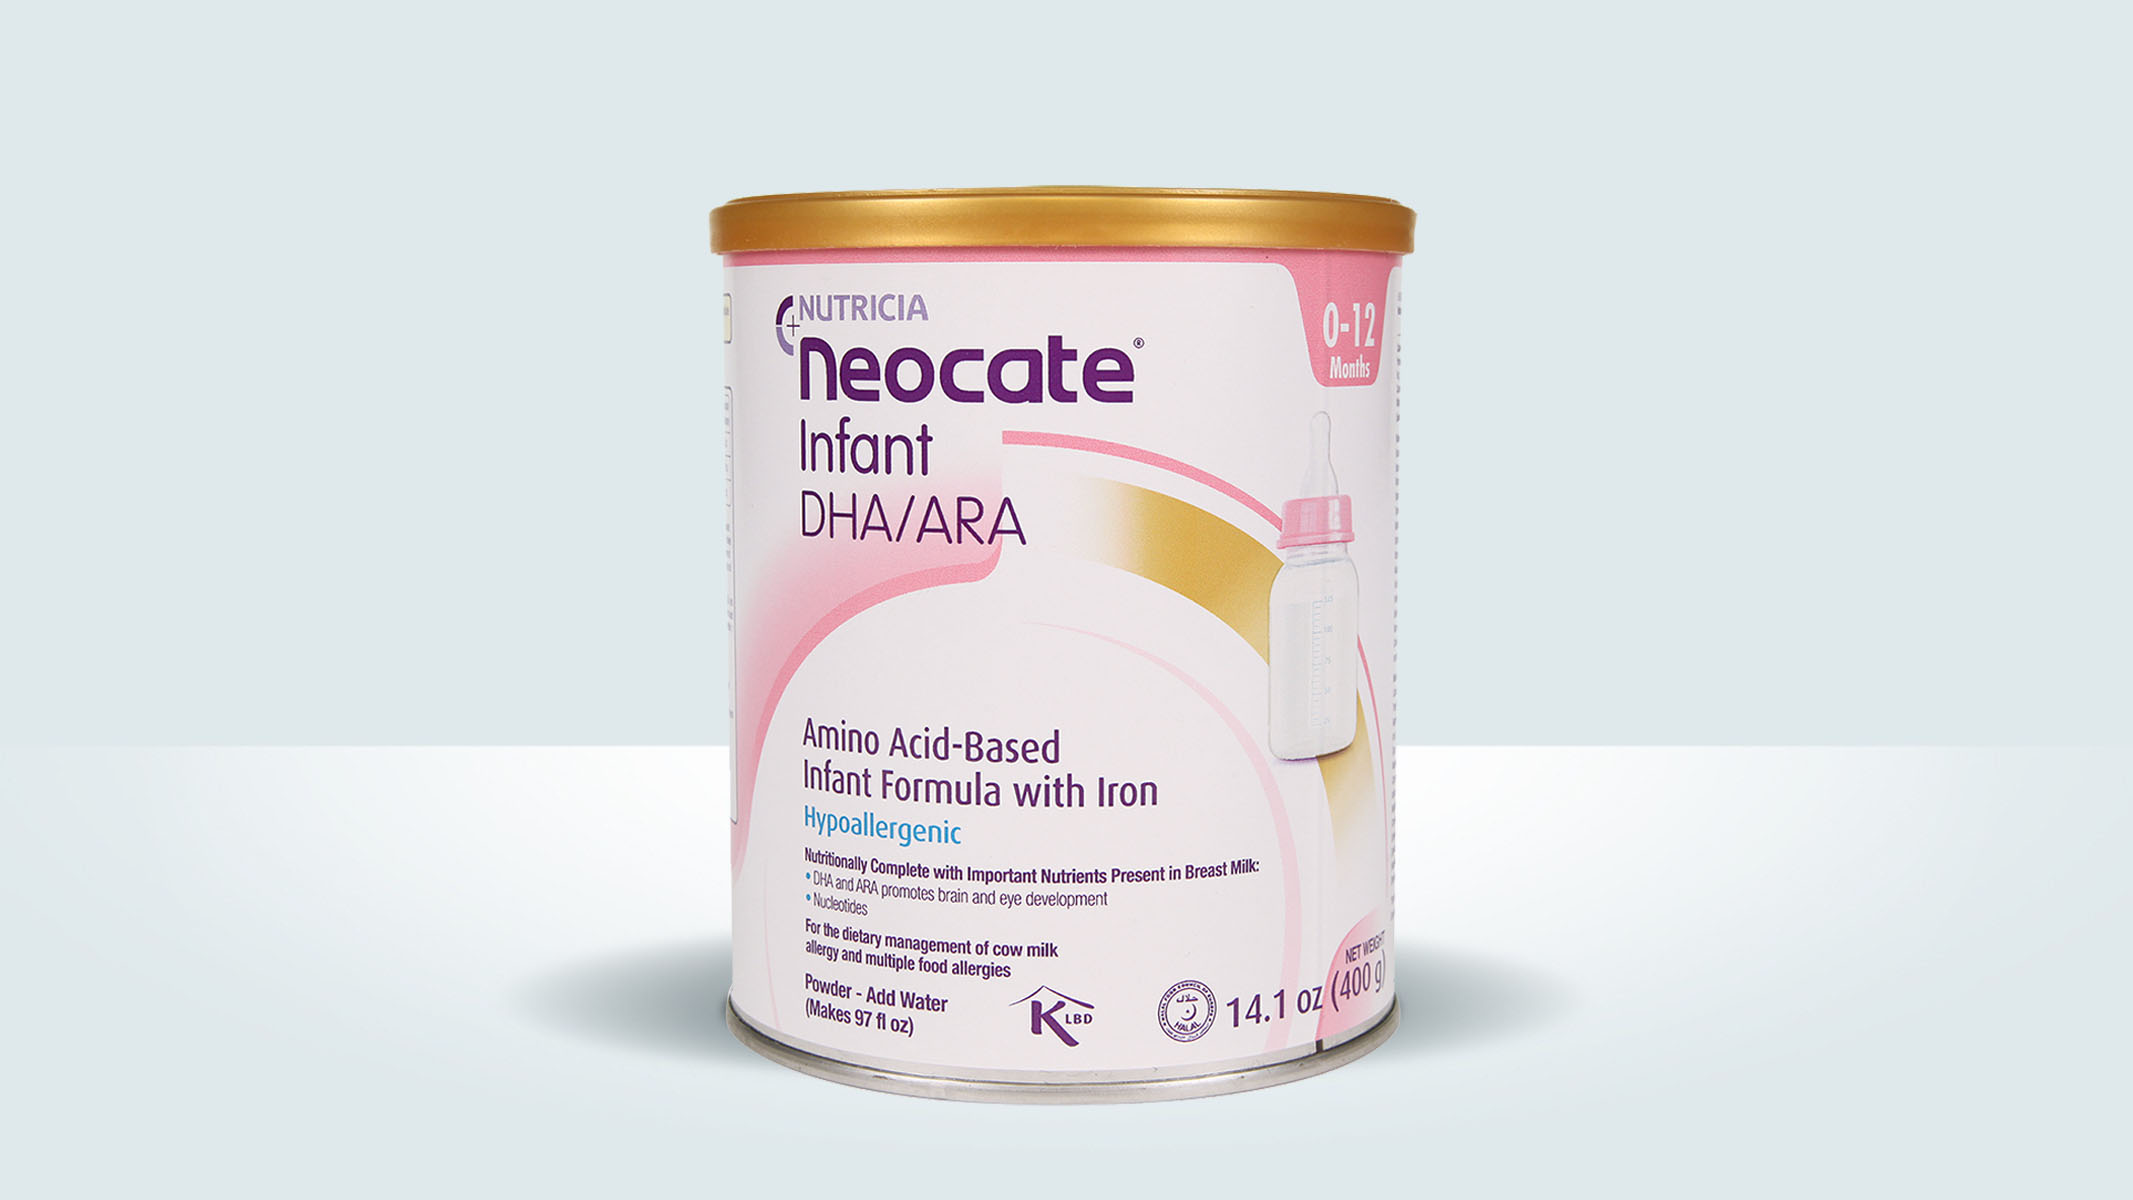 Neocate Infant DHA/ARA 360° of the can